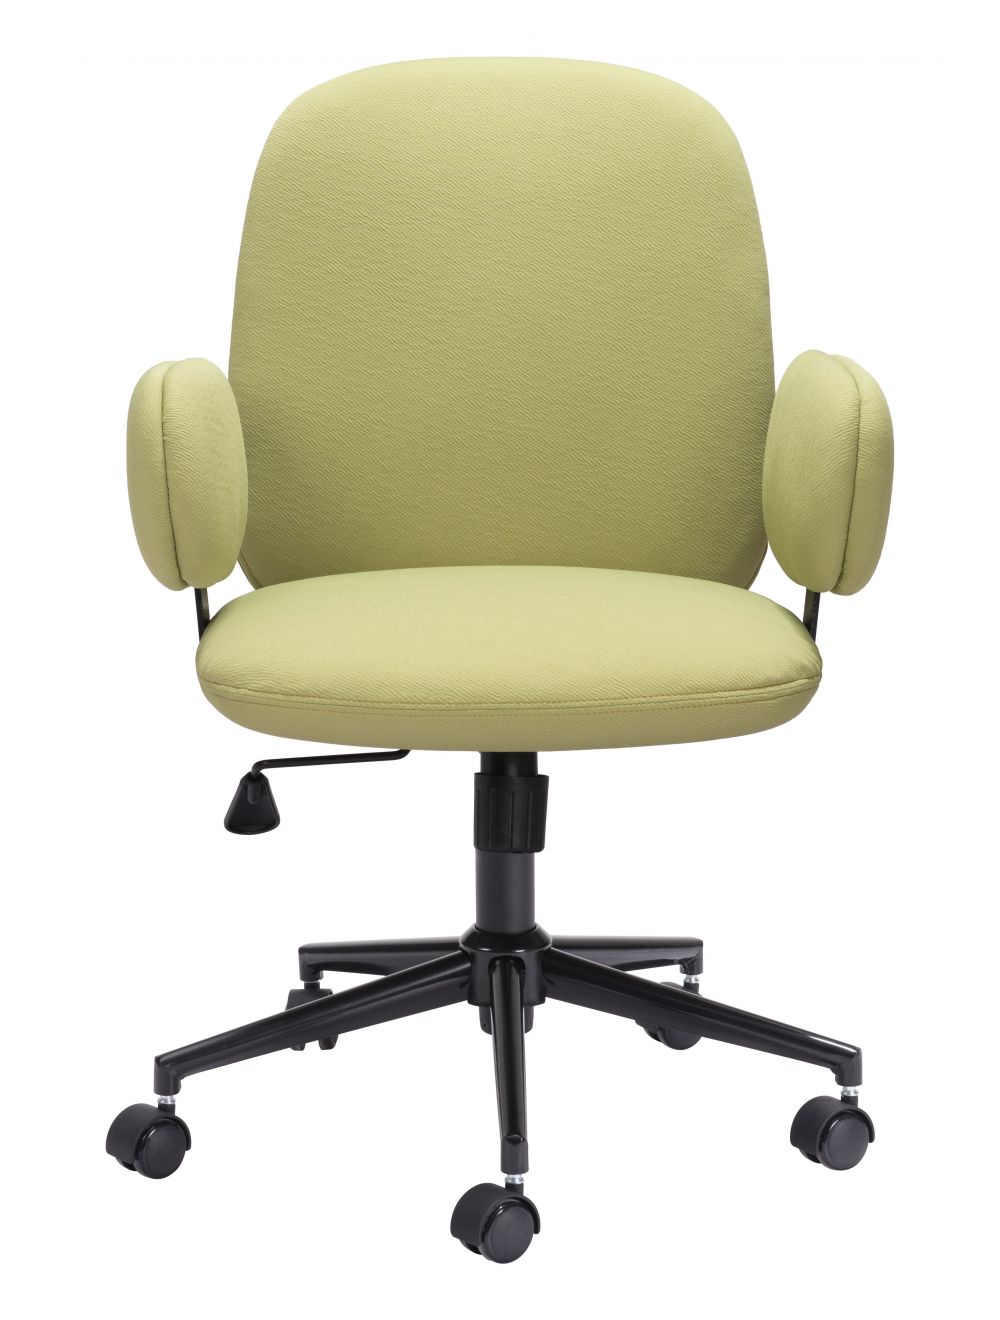 Lionel Office Chair Olive Green